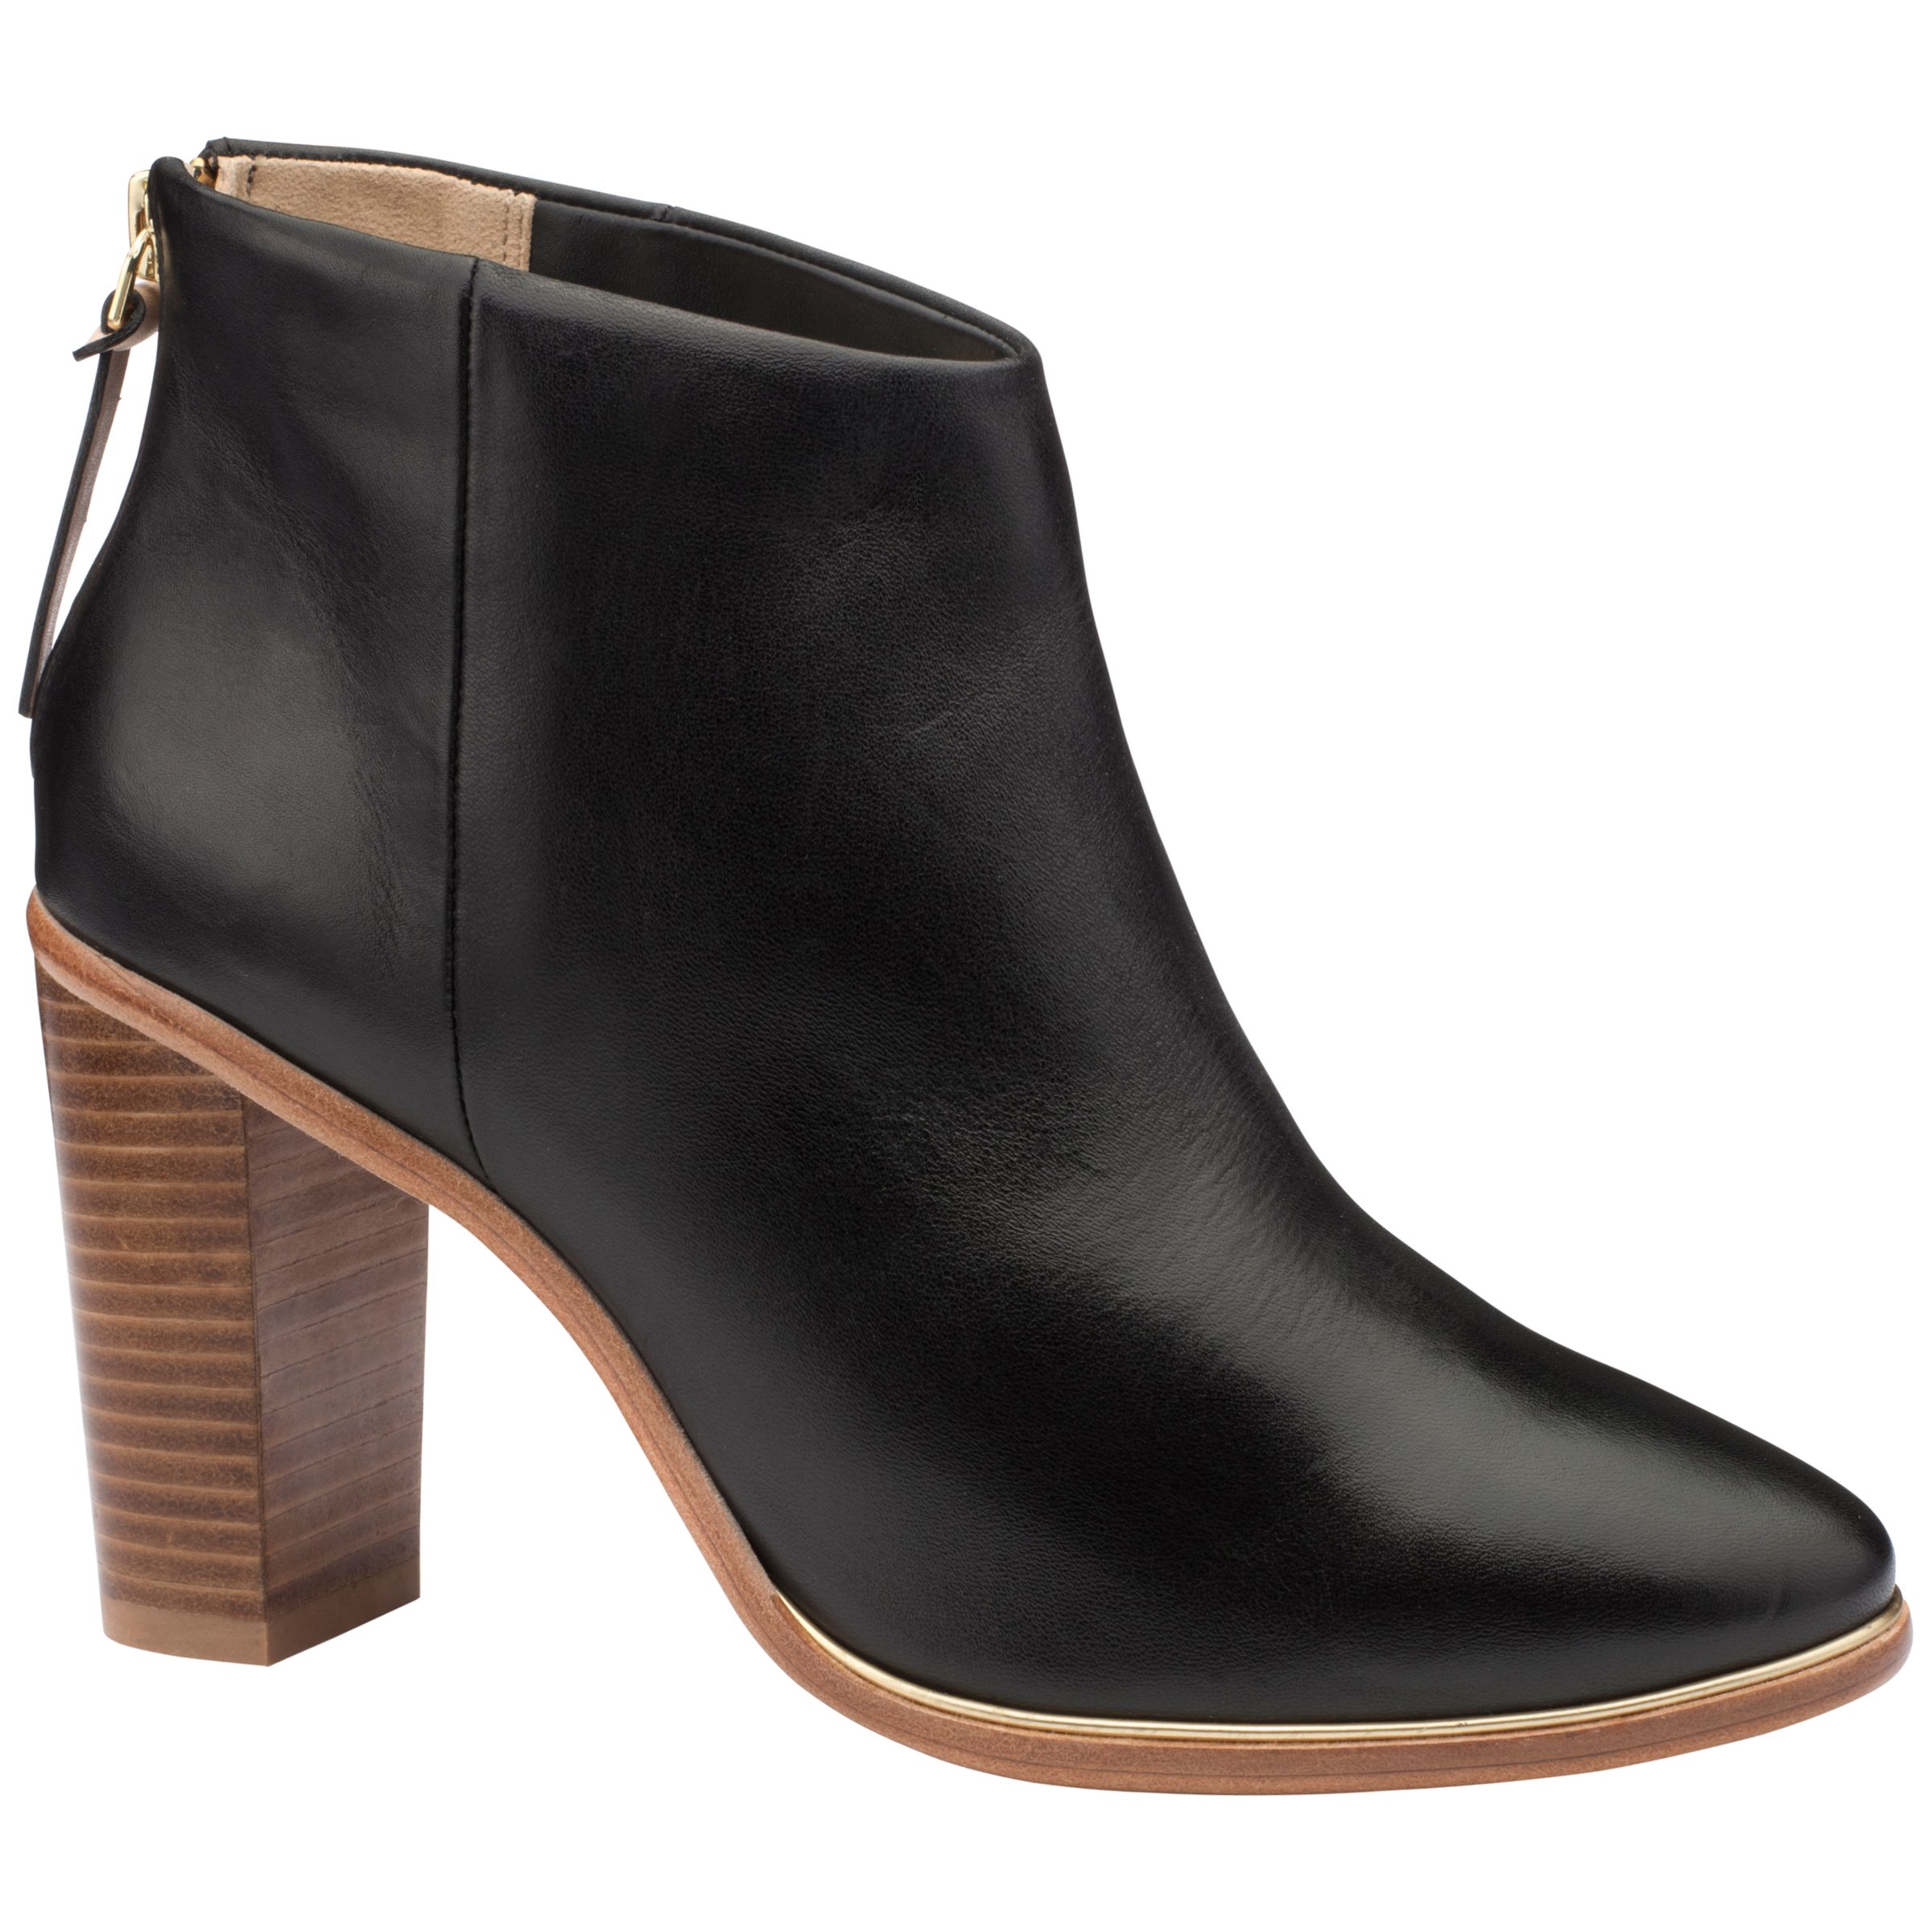 Ted Baker Lorca 2 Block Heel Ankle Boots, Black